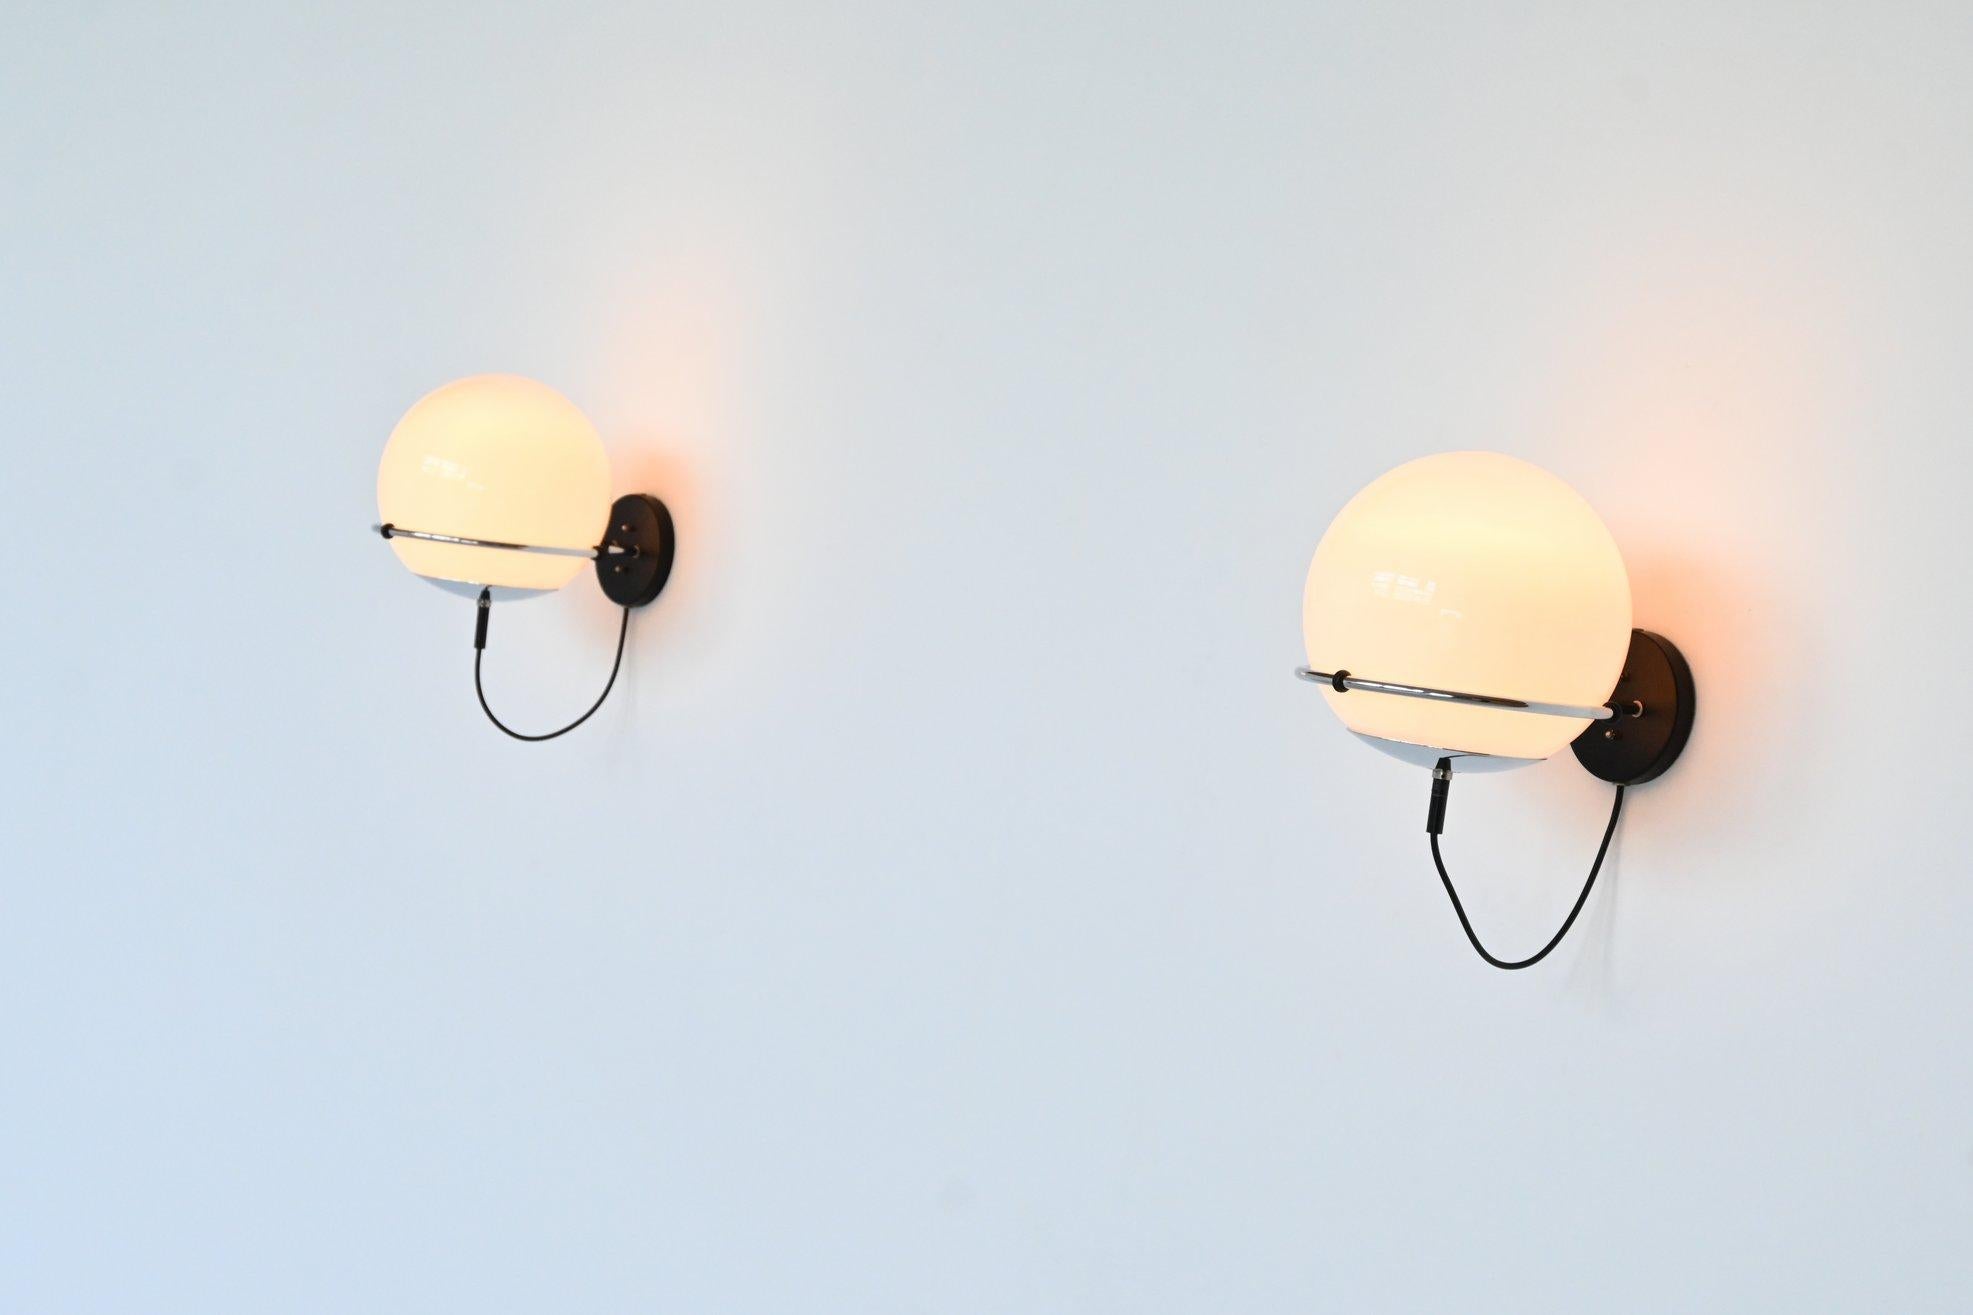 Beautiful pair of sconces lamps model C-1751 Morning Haze designed by Frank Ligtelijn and manufactured by RAAK, The Netherlands 1970. These lamps have a chrome plated ring with a black lacquered wall plate and a glass ball that goes from white glass